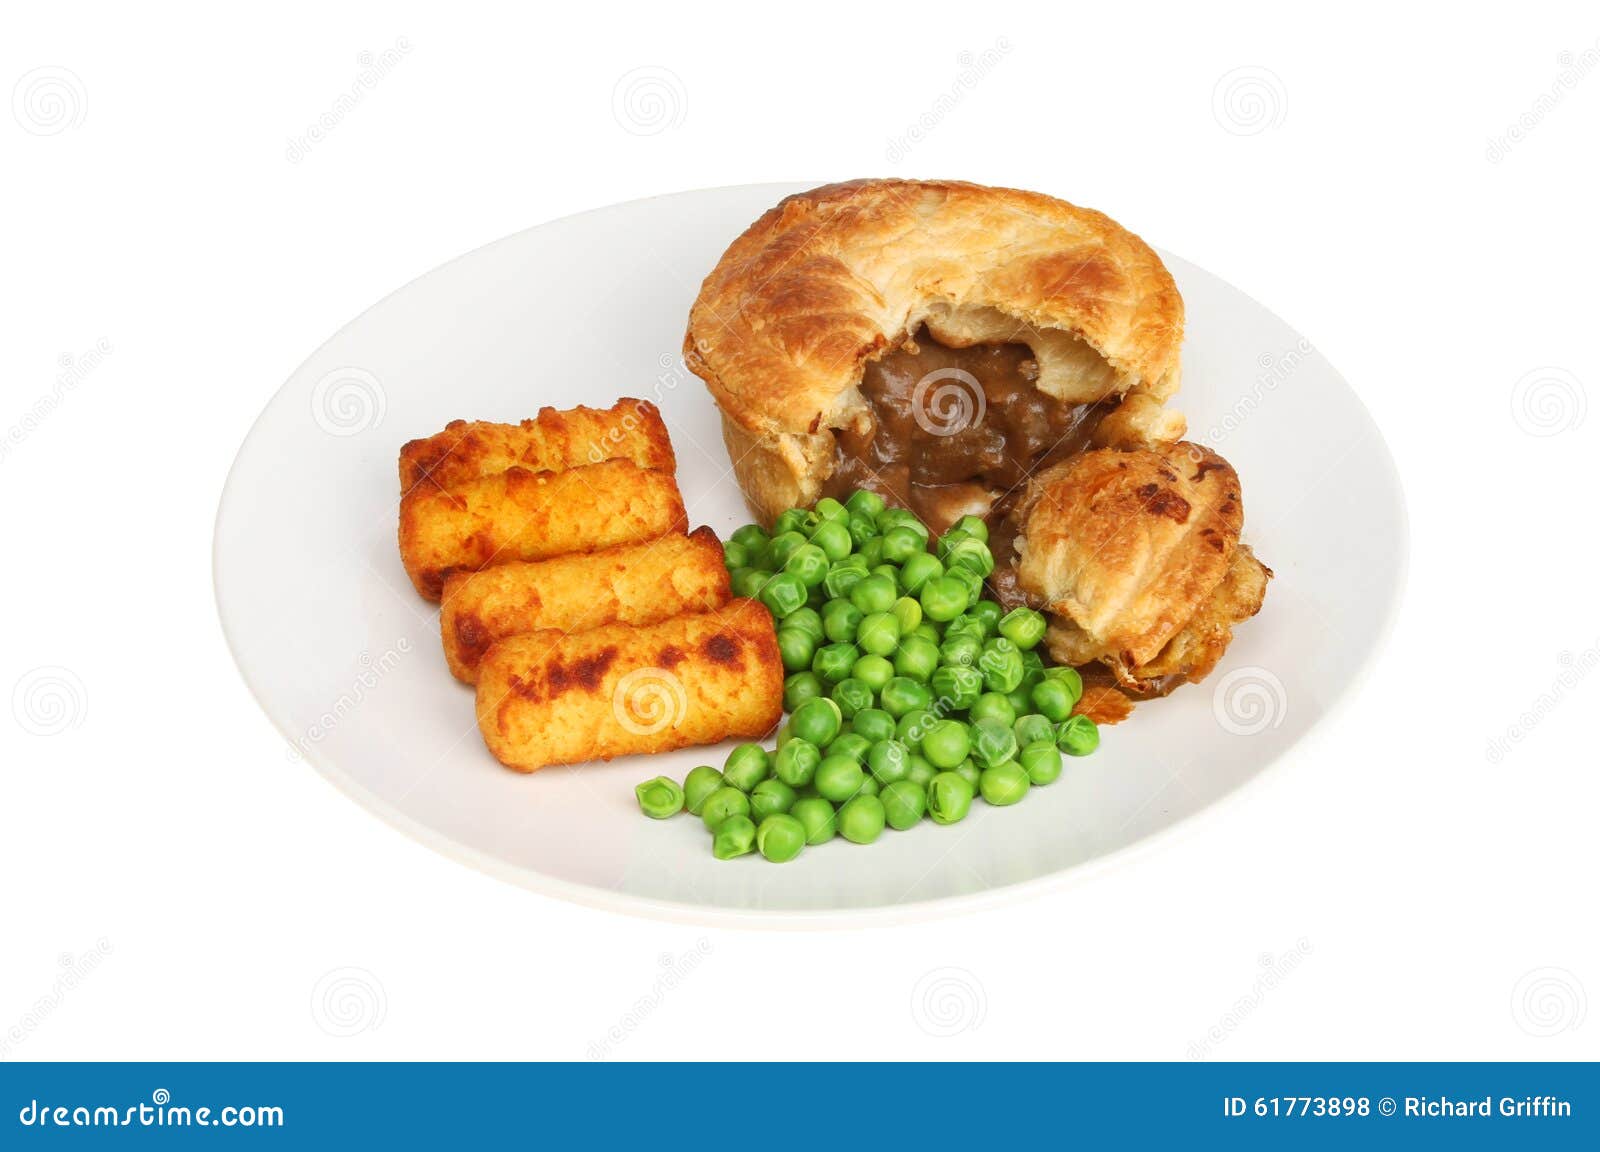 Steak Pie With Potatoes And Peas Stock Photo - Image of ...